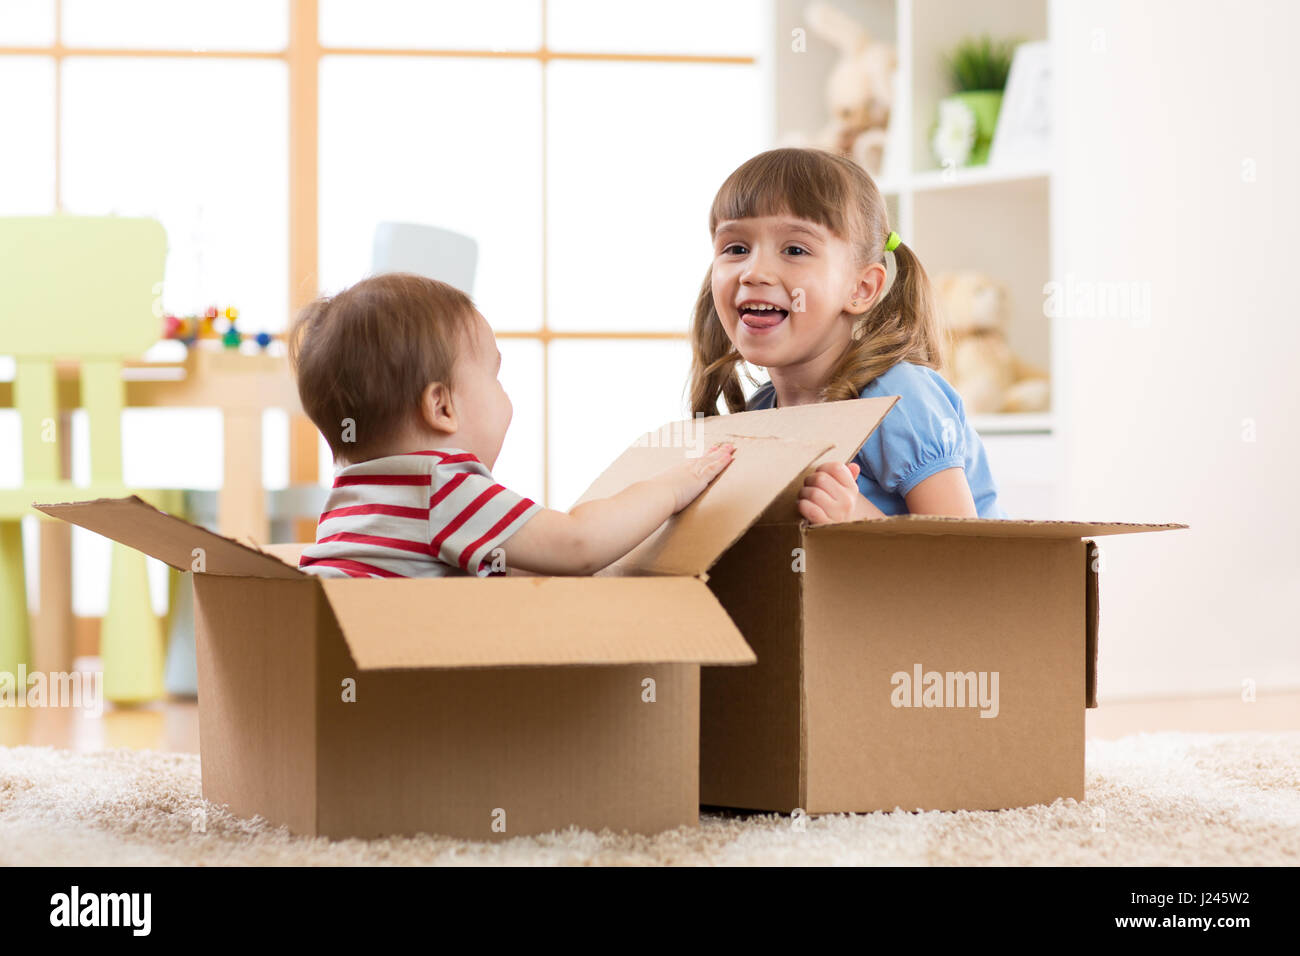 Baby brother and child sister playing in cardboard boxes Stock Photo